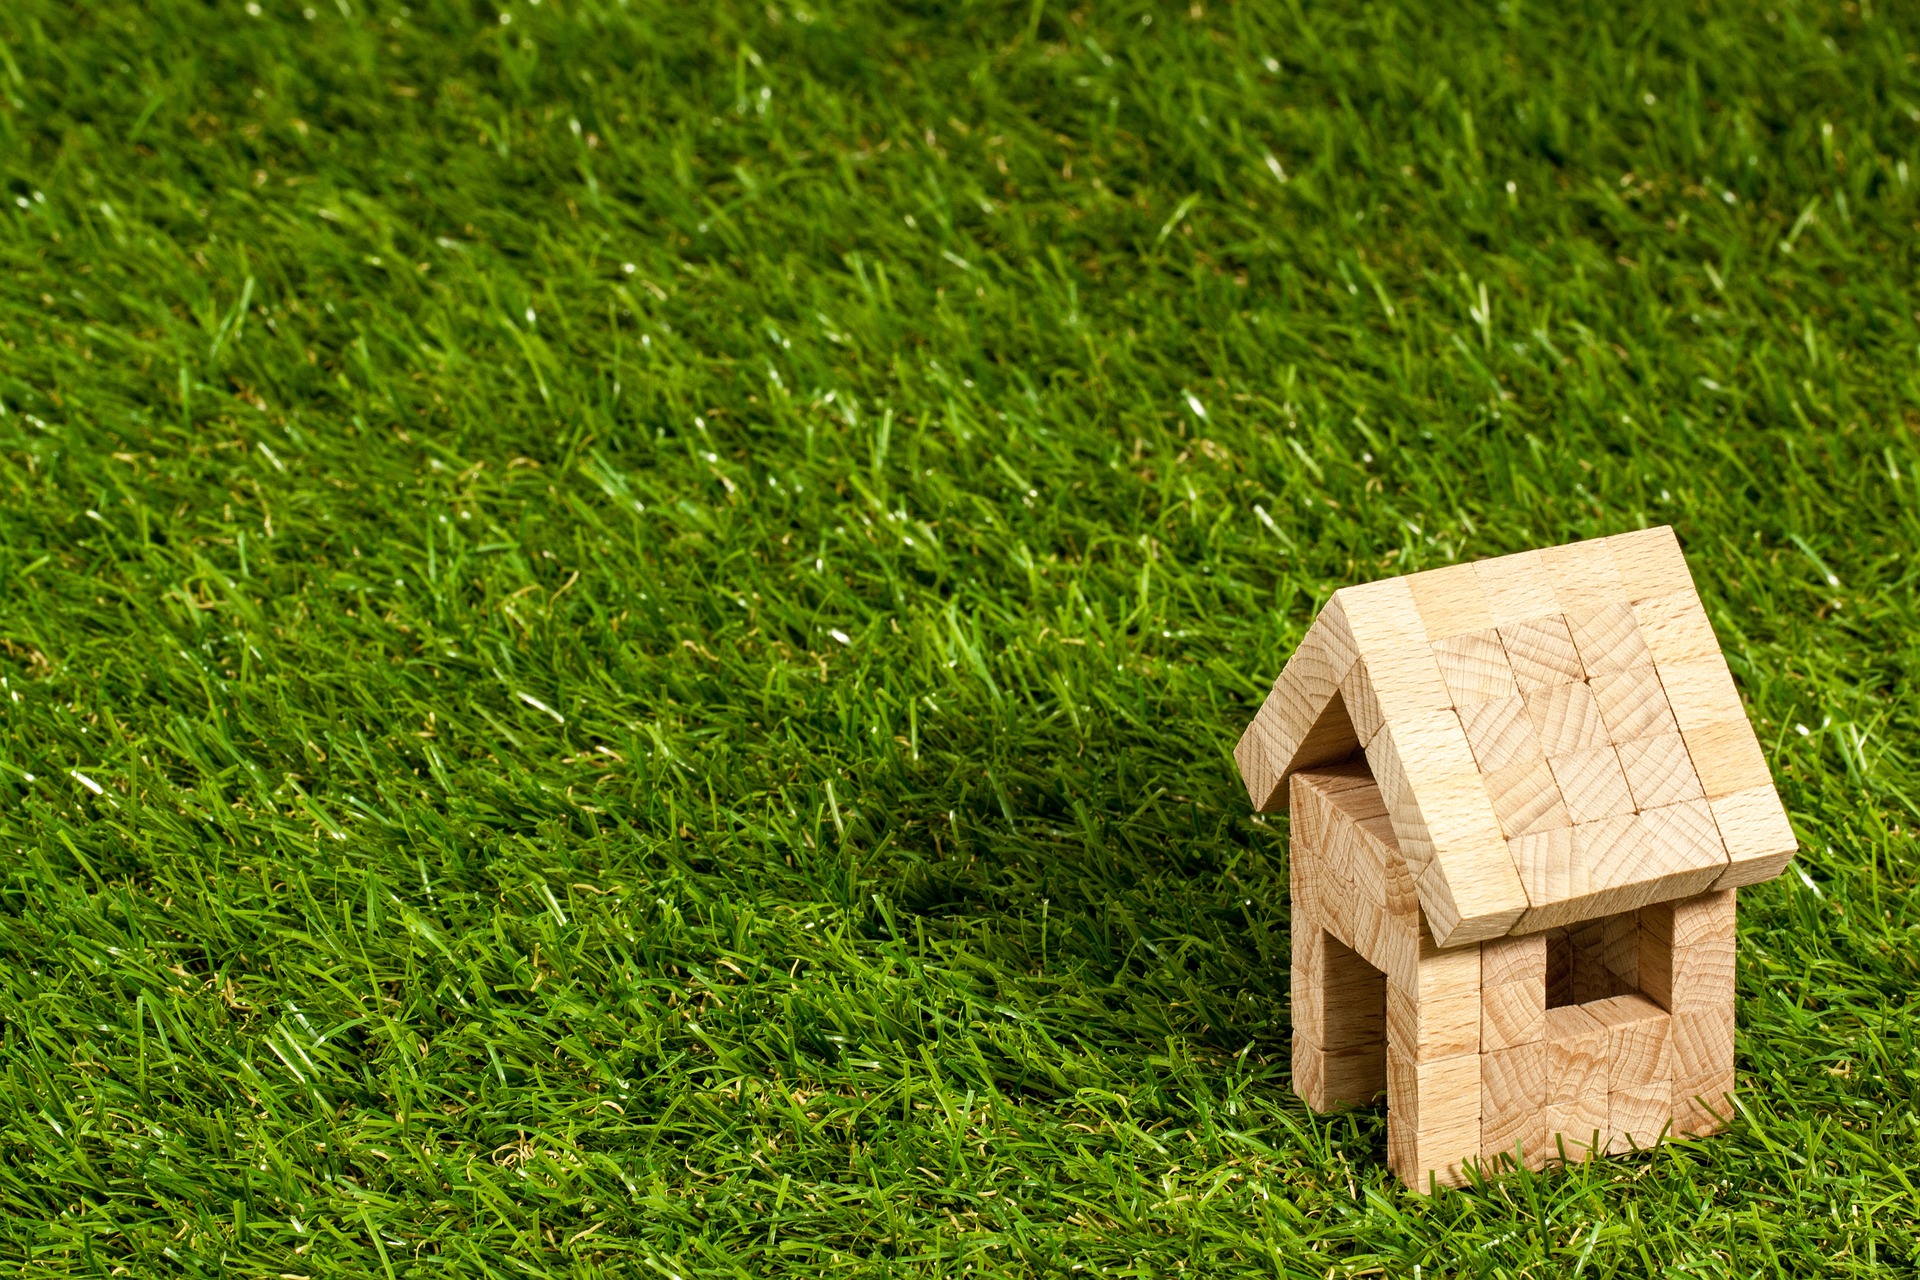 A house made of wooden blocks, on a green grass field; our Probate Solicitors in Lancaster discuss why Probate is required to sell or transfer property when the owner has died.